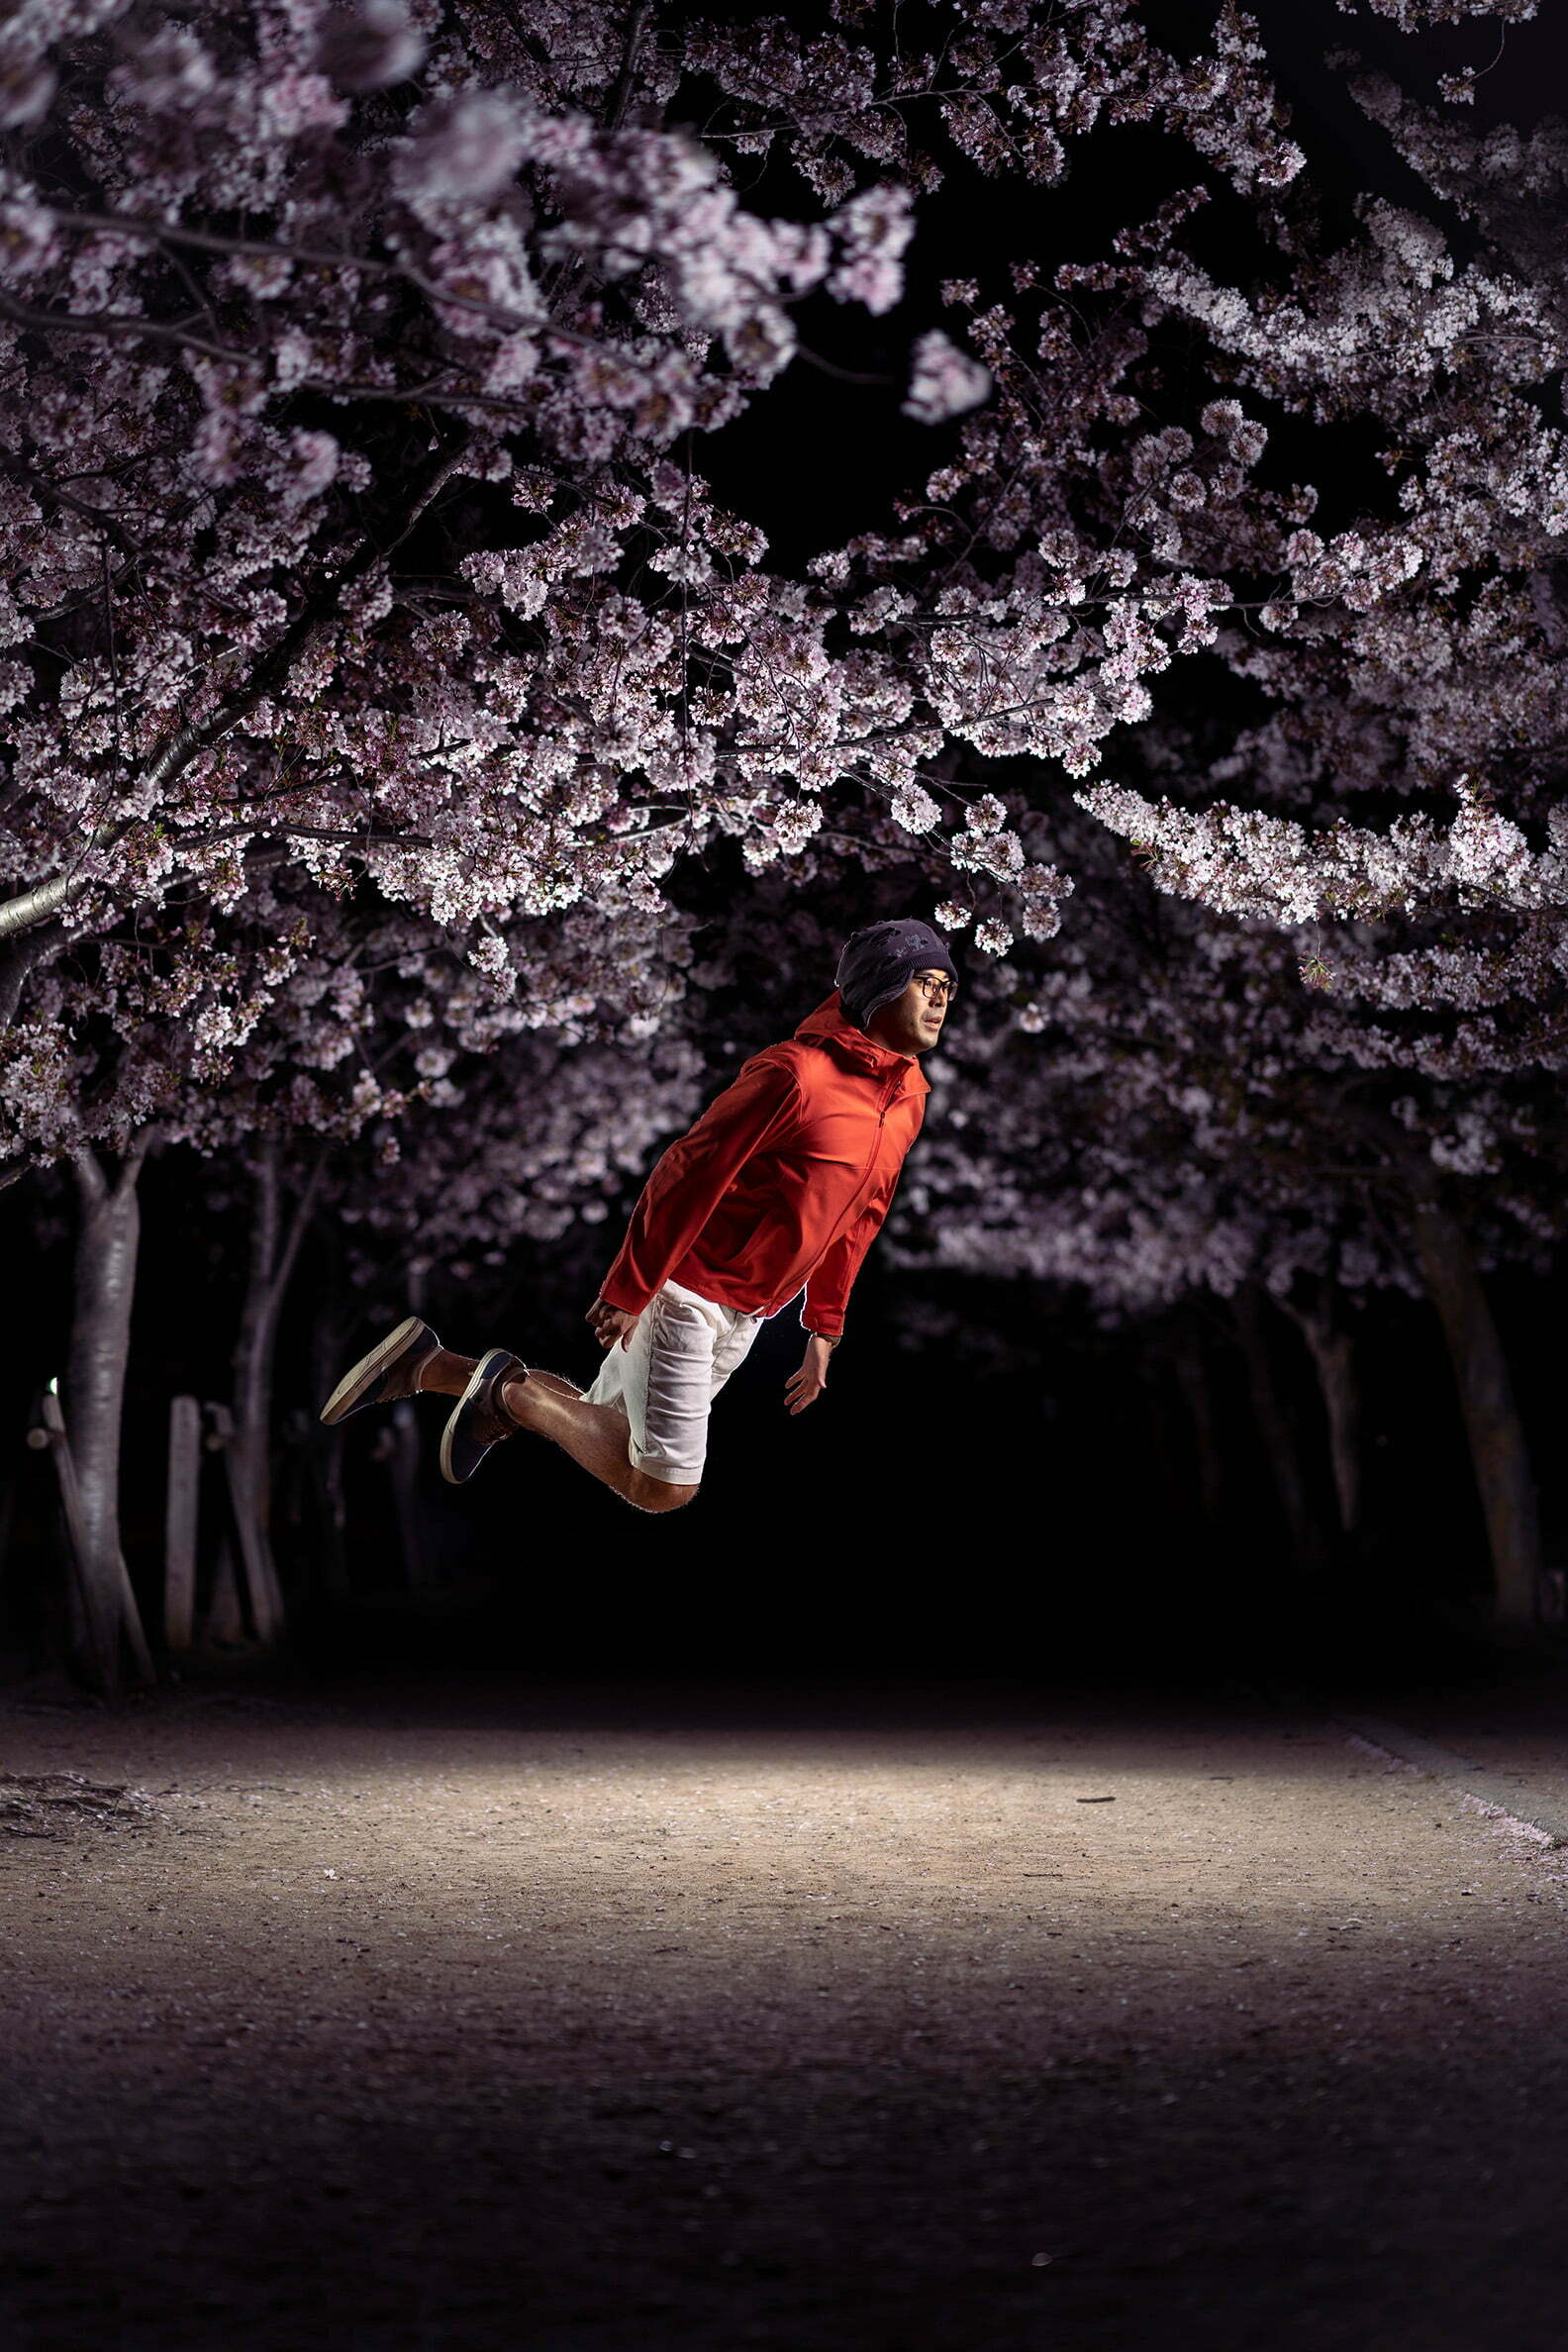 Night Floating at the Park - Photographer Name: Tomohiko Funai - In this self-portrait, there are no photoshop tricks. I froze my jumping motion by using a short flash duration on three separate flashes. Additional lights were used to highlight the cherry blossoms. The shot was taken at Koyaike Park in Hyogo, Japan, in April 2021.